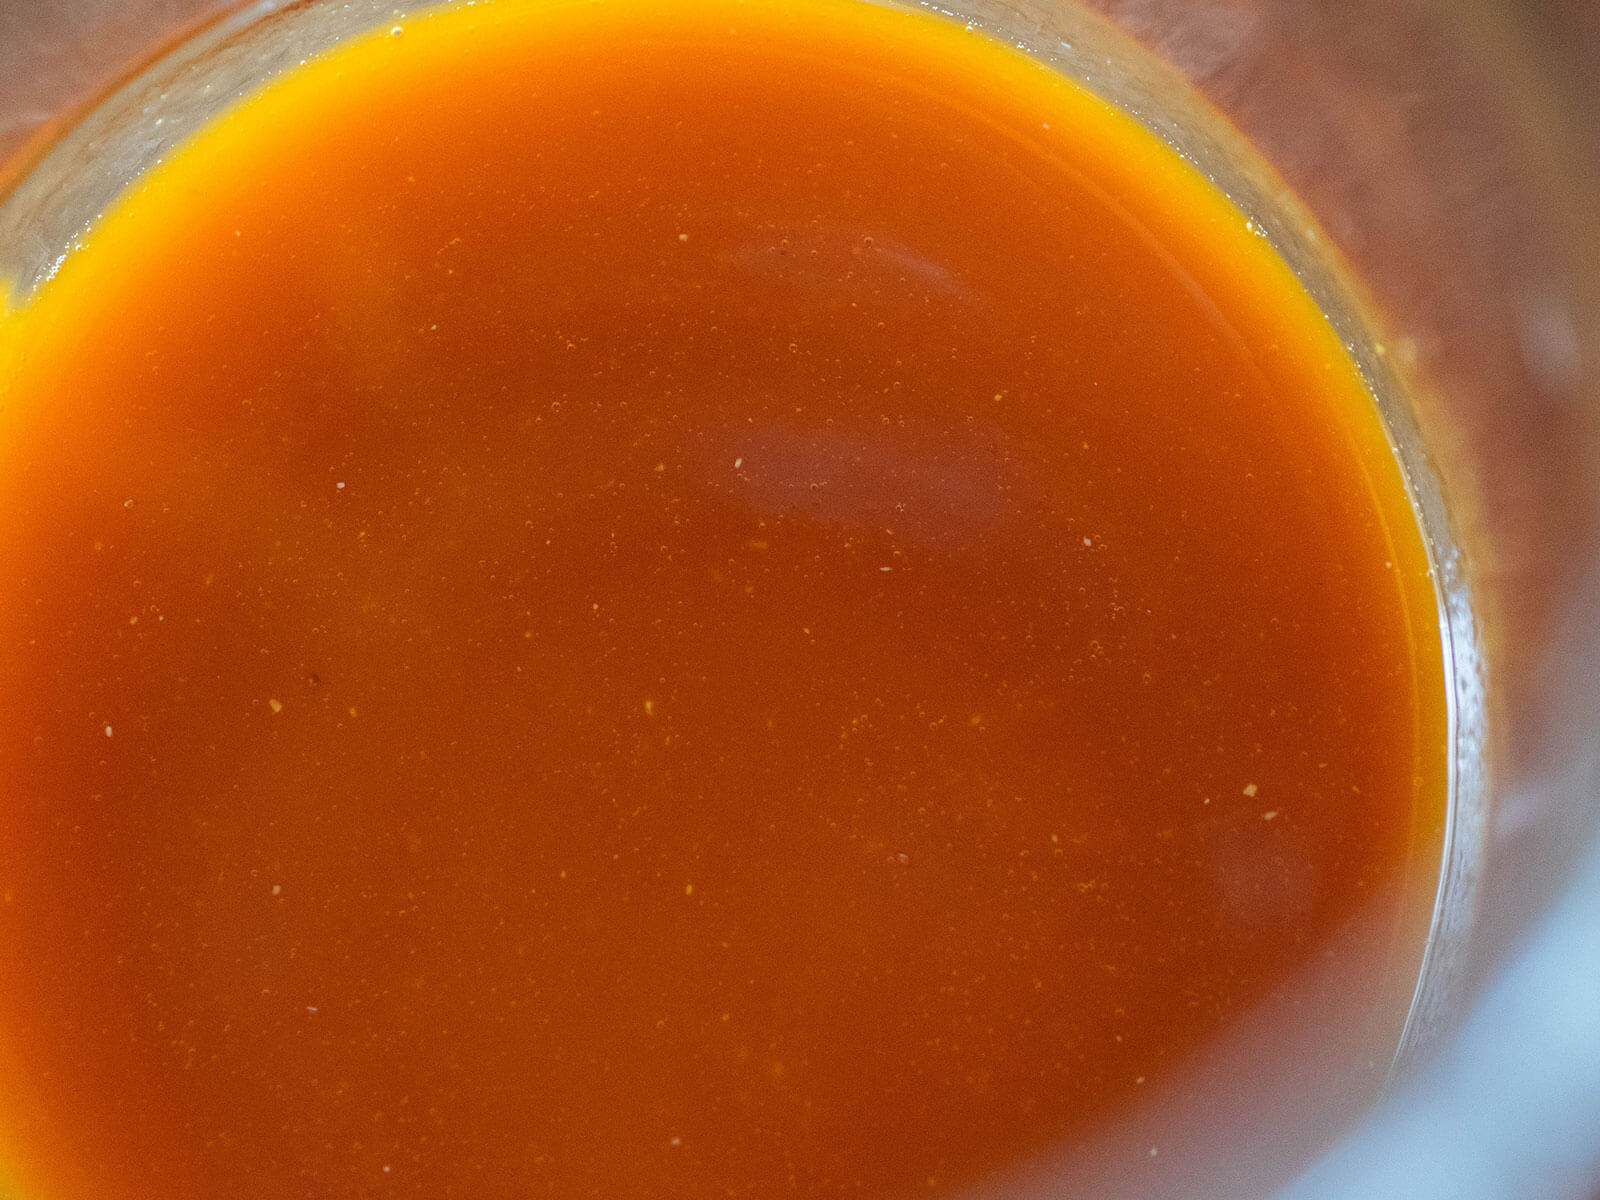 Strained fermented hot sauce made from chile peppers